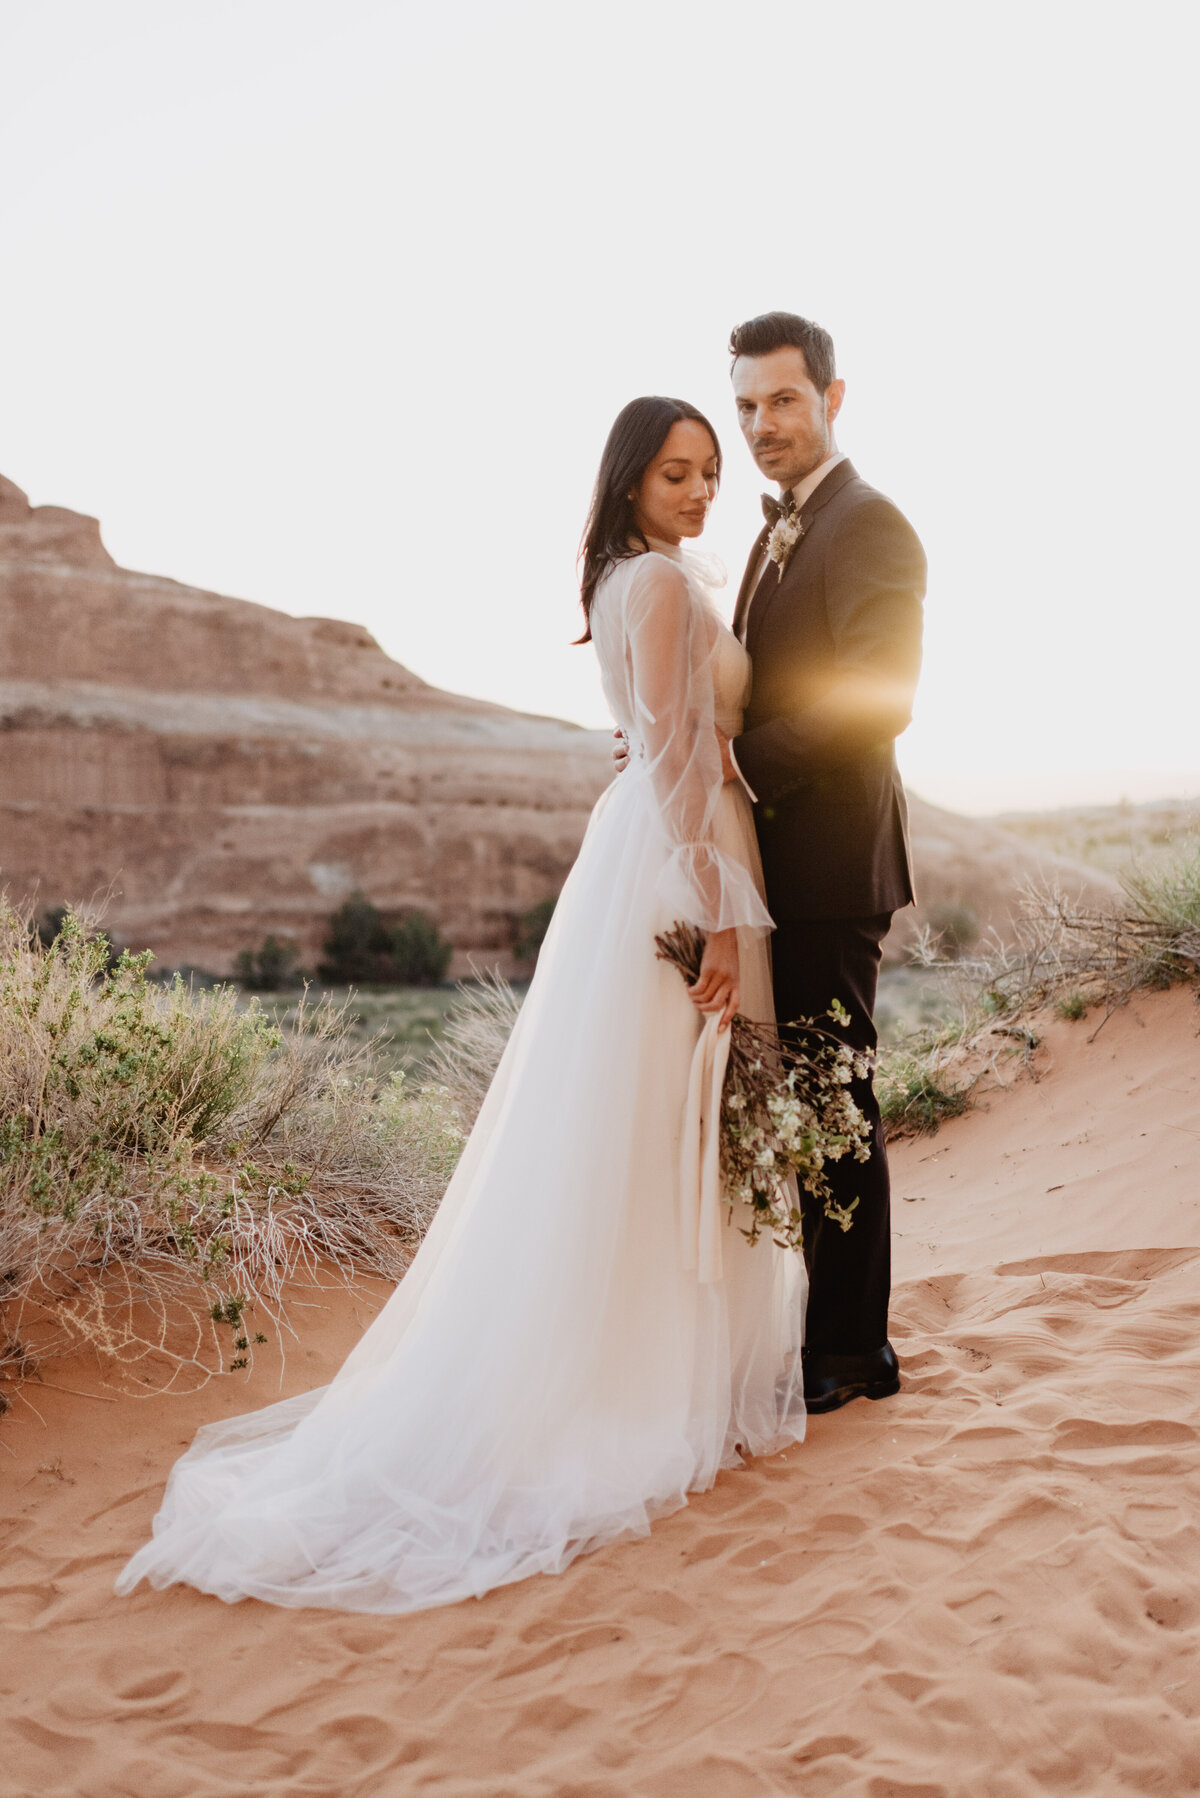 Utah elopement photographer captures sunset portraits of bride and groom in Arches National Park